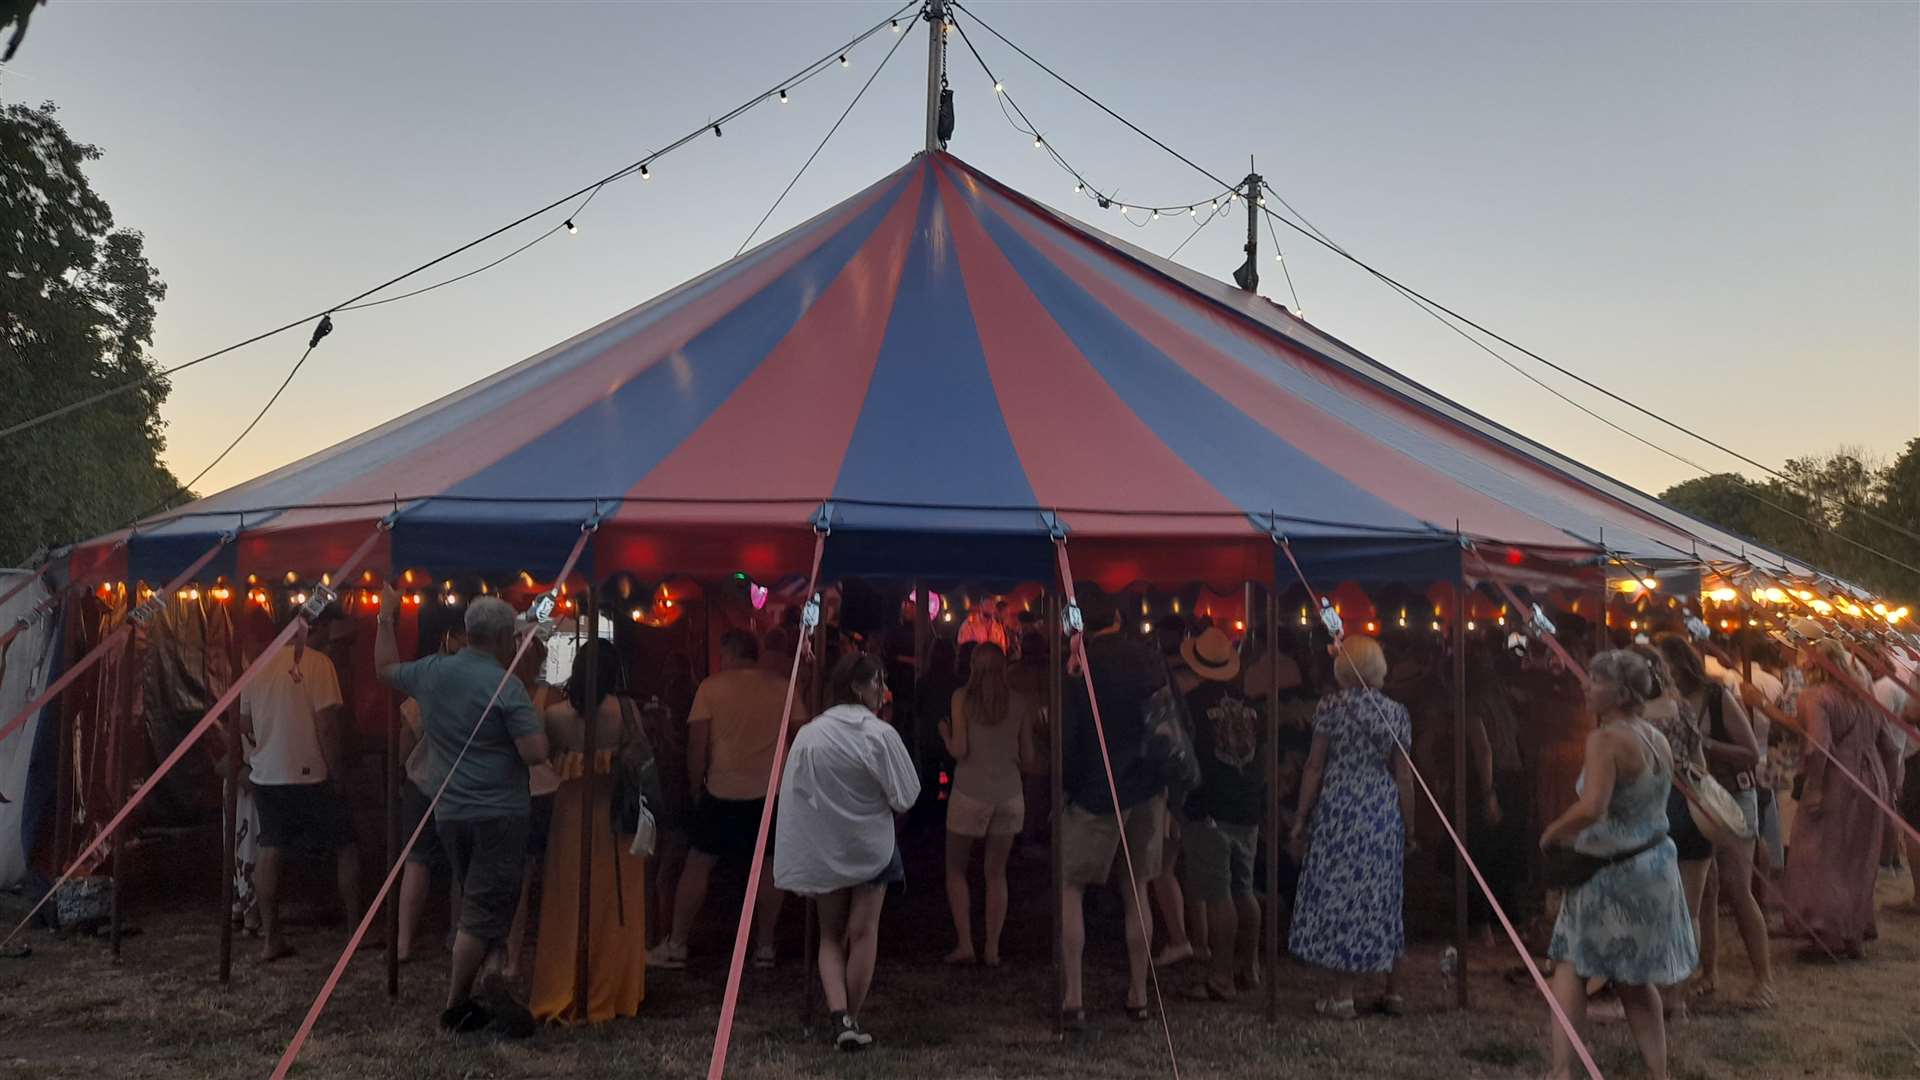 The festival's second stage, inside a bell tent